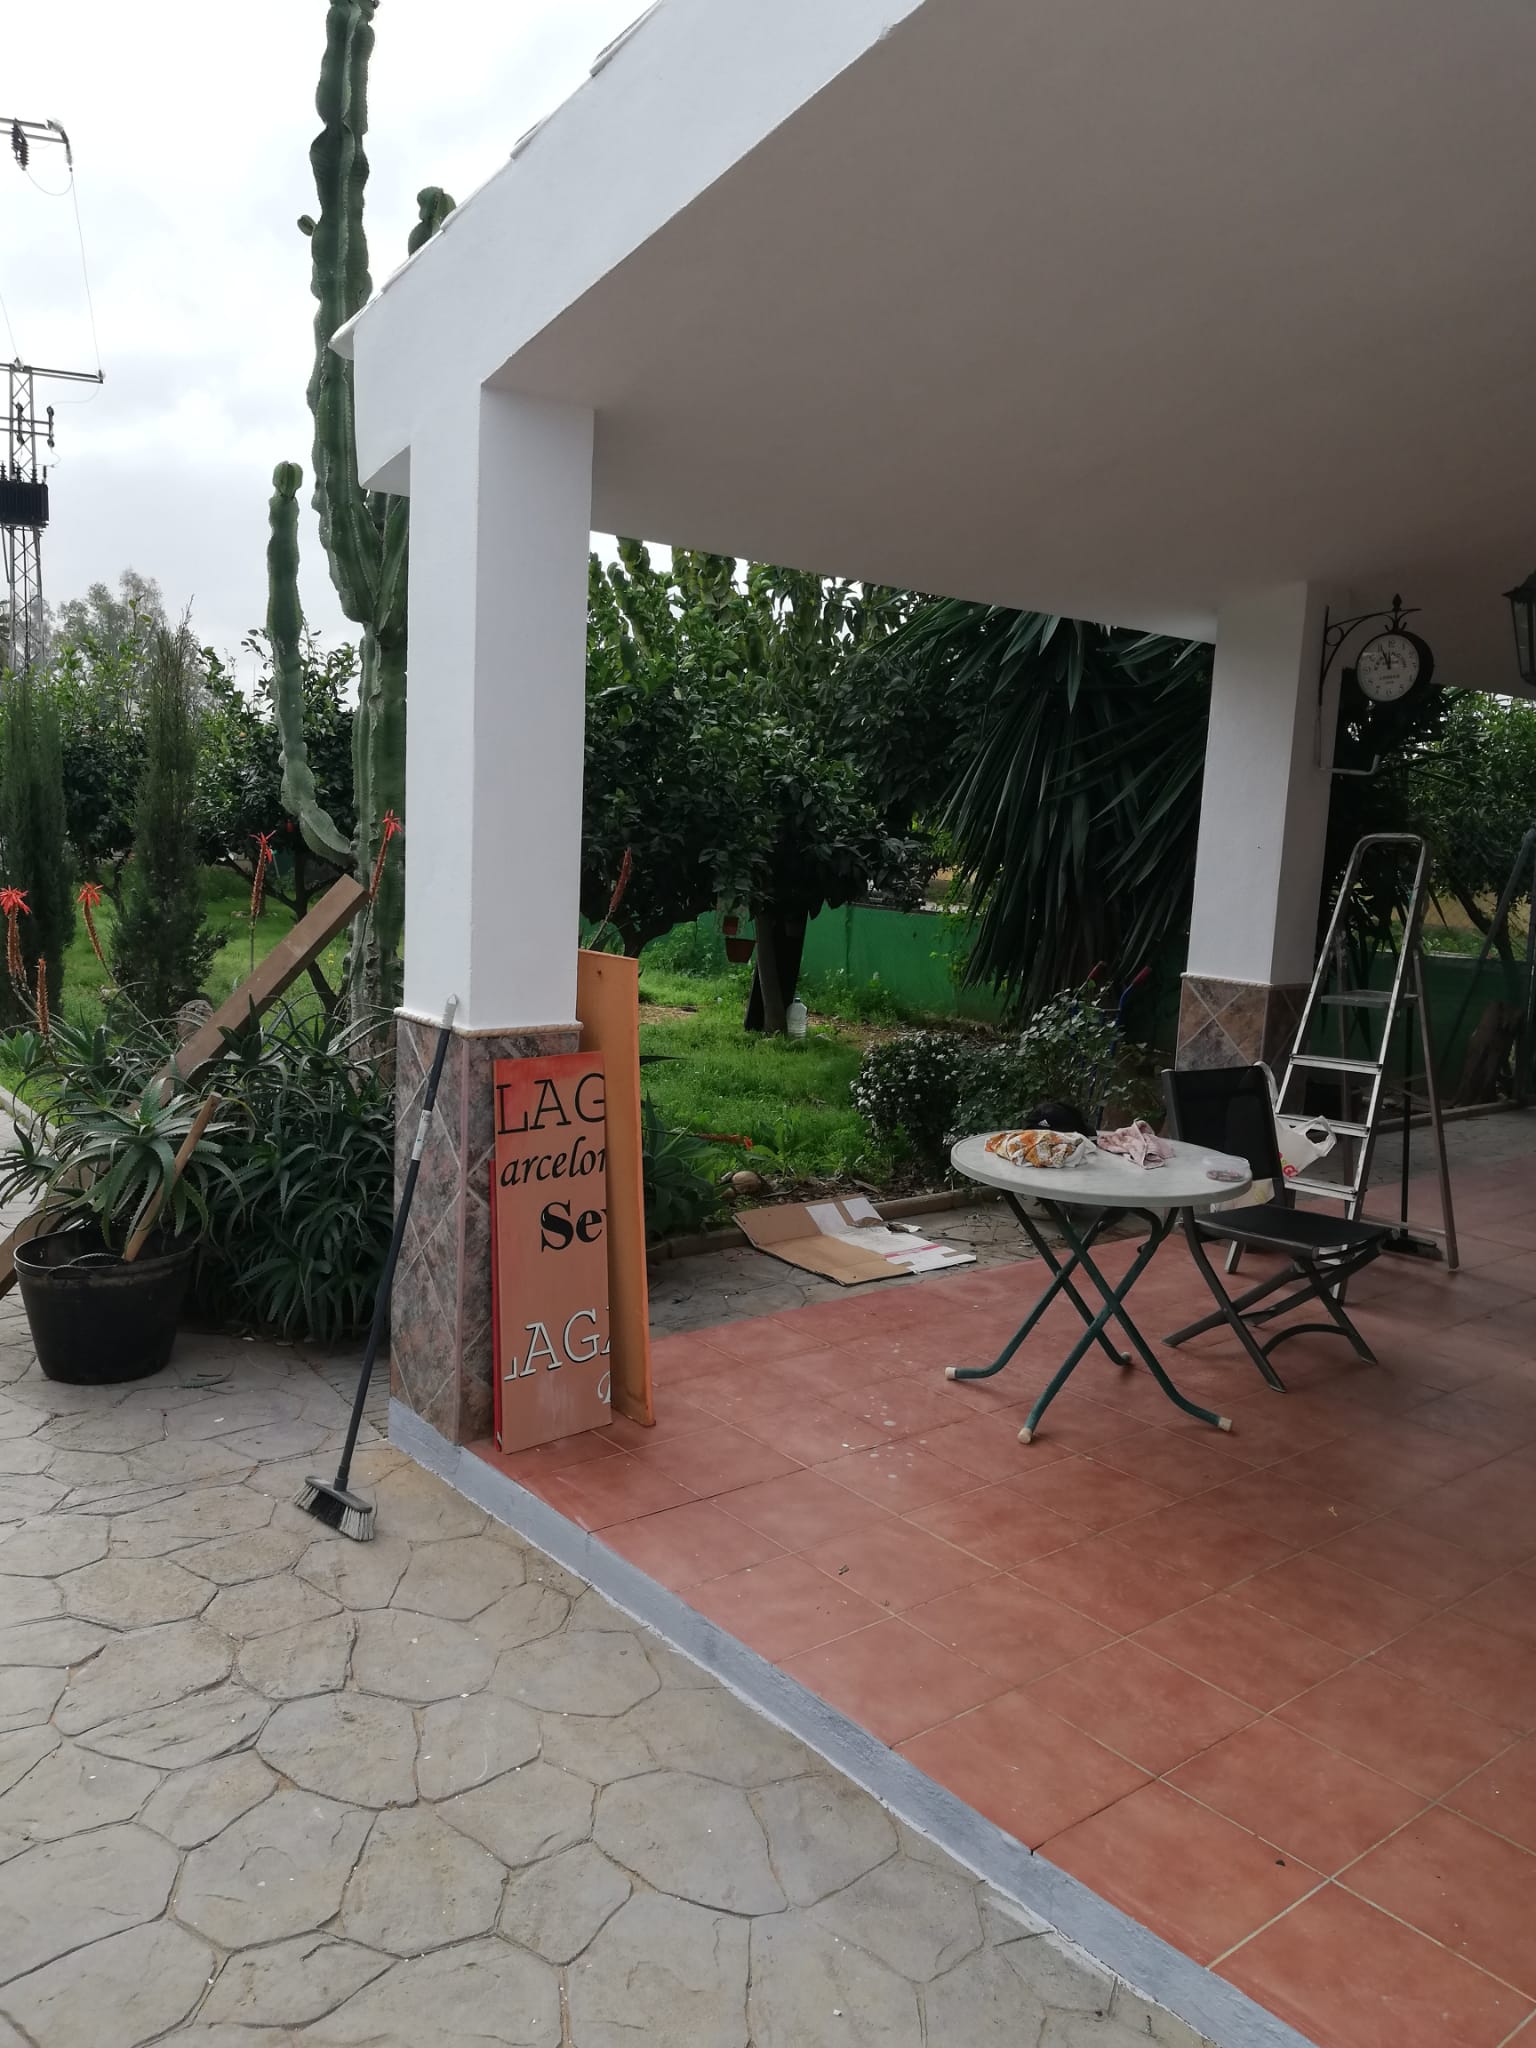 2 bedroom house for rent in Mijas golf - thumb - mibgroup.es